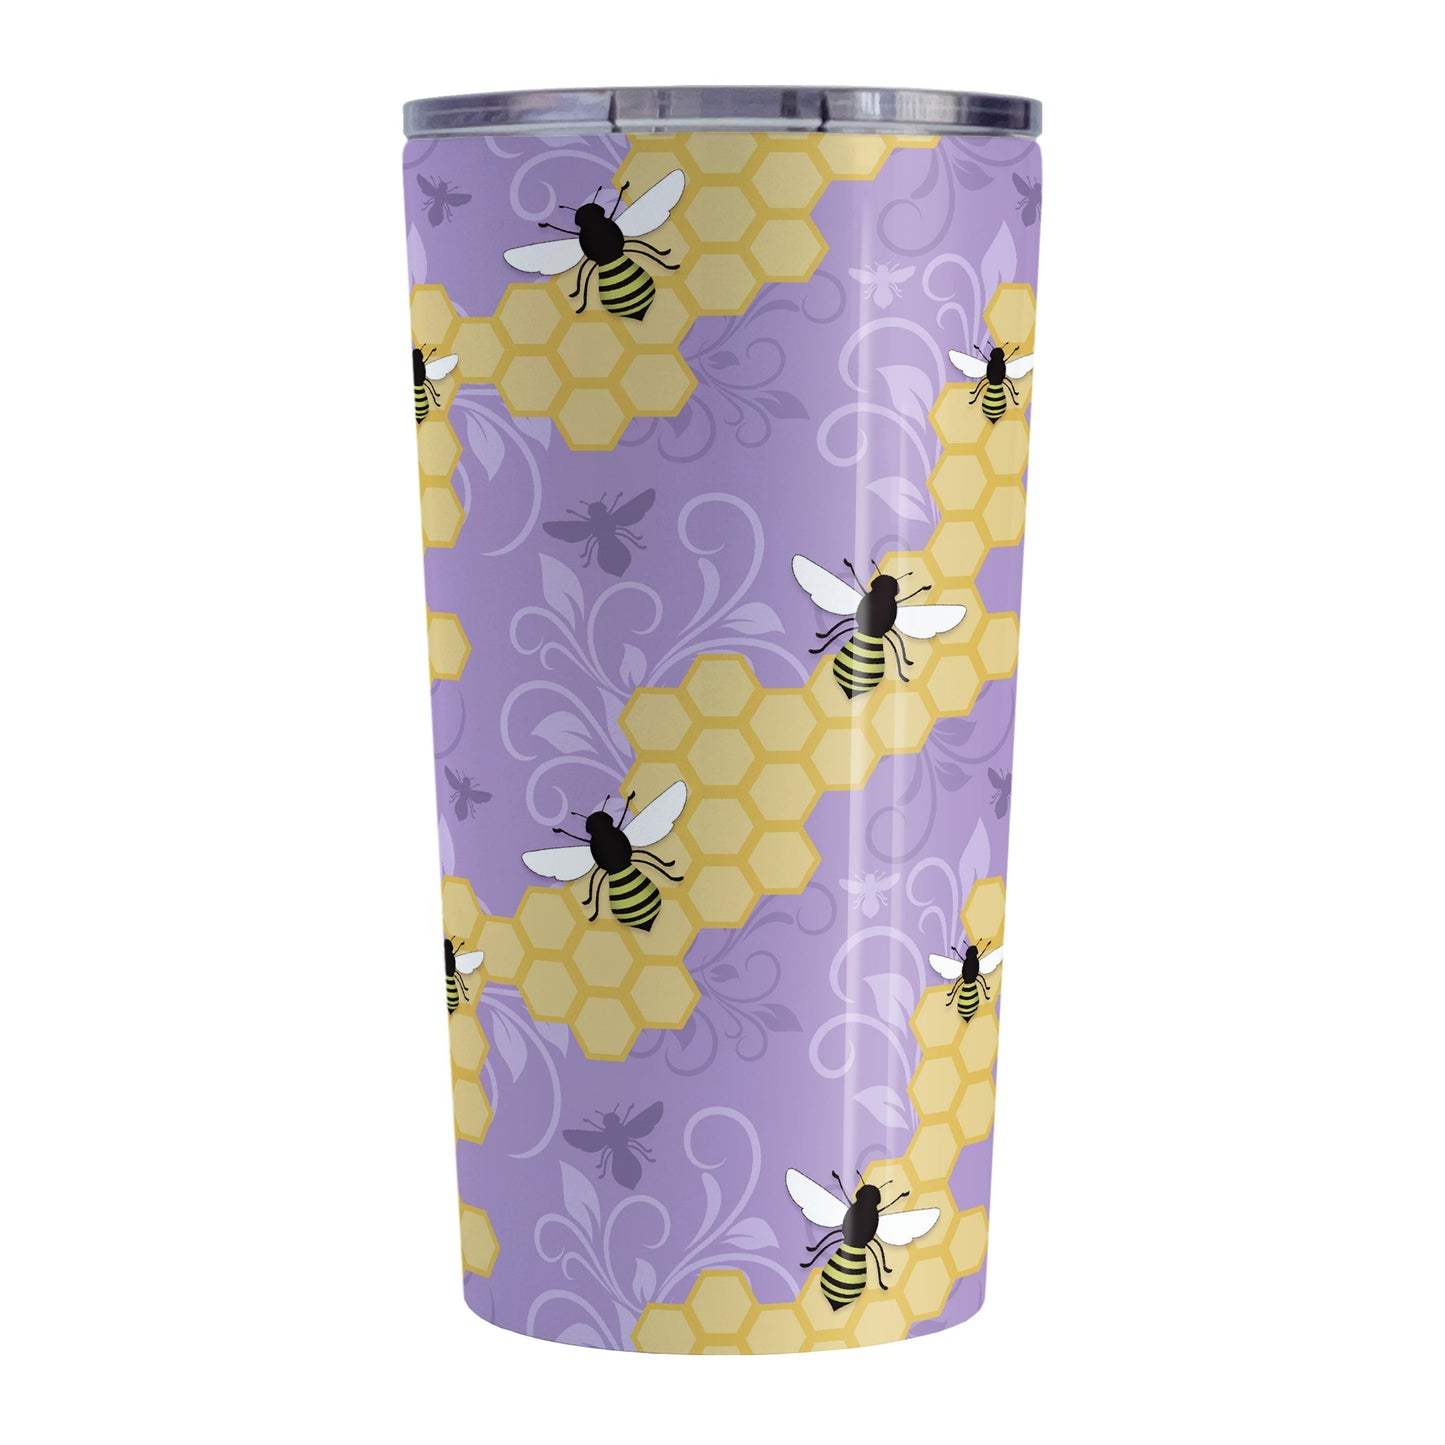 Purple Honeycomb Bee Tumbler Cup (20oz, stainless steel insulated) at Amy's Coffee Mugs. A tumbler cup designed with a pattern of black and yellow bees on honeycomb lines over a purple flourish background that wraps around the cup.